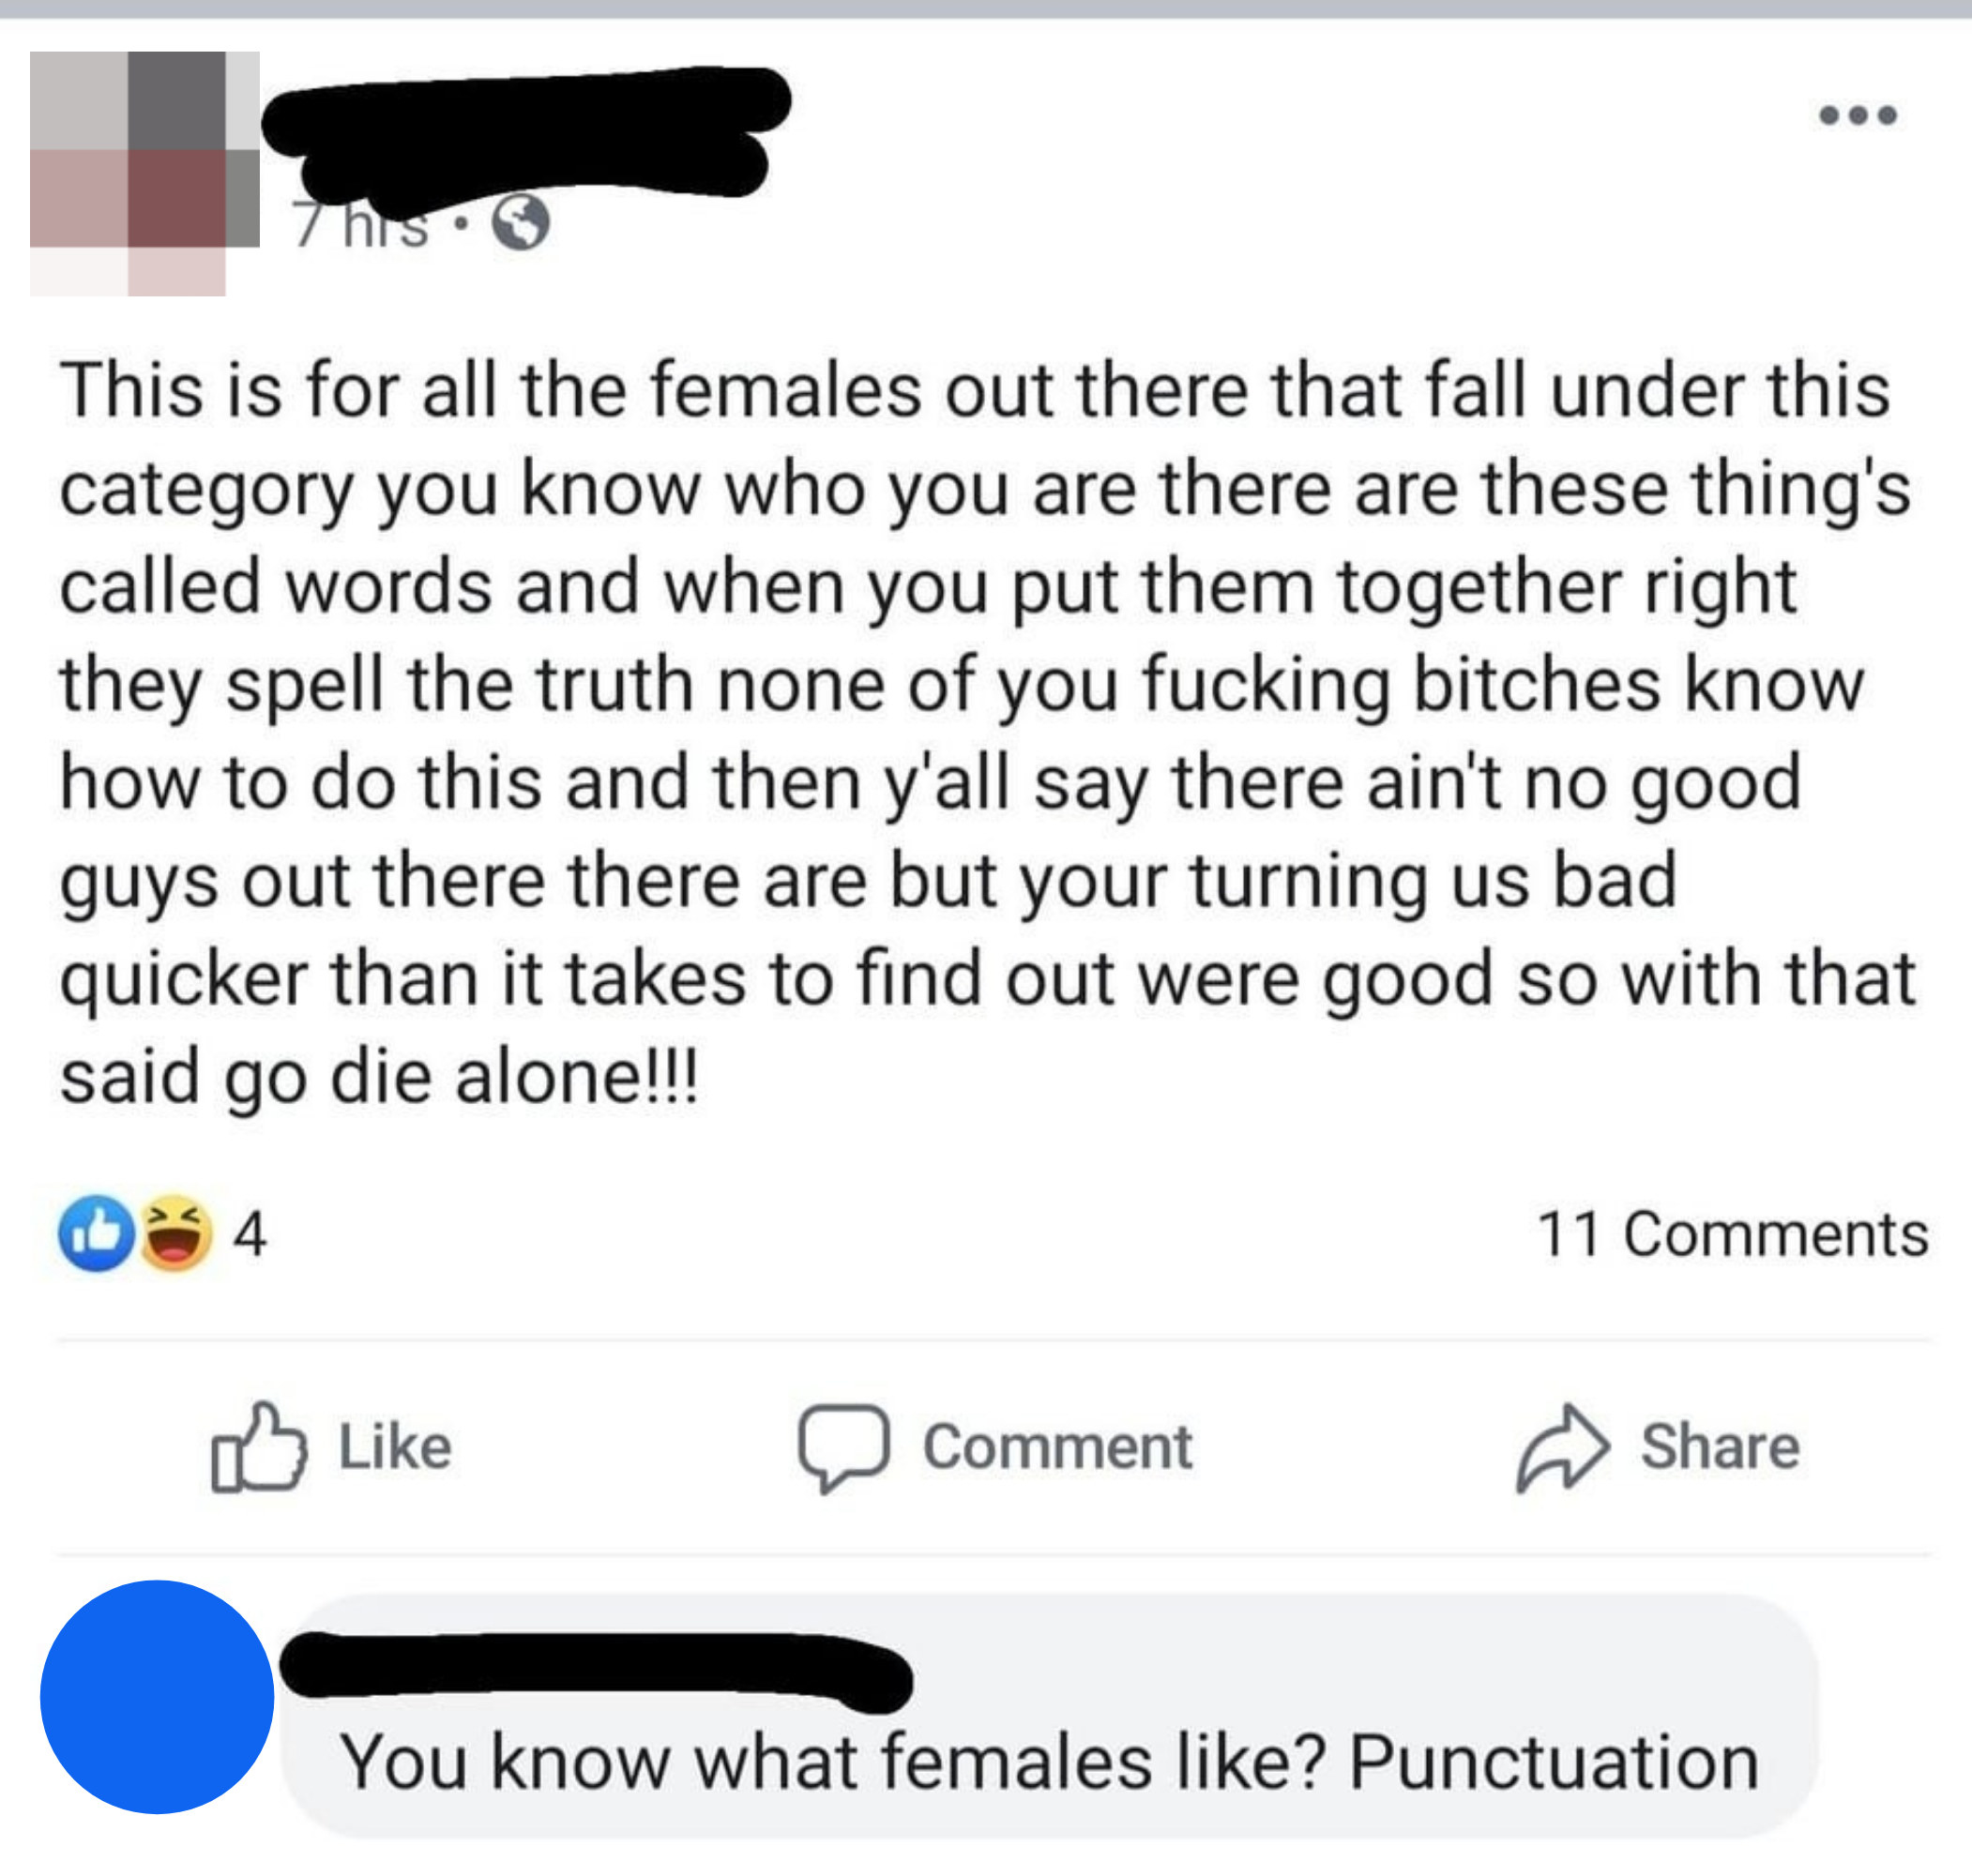 &quot;You know what females like? Punctuation.&quot;